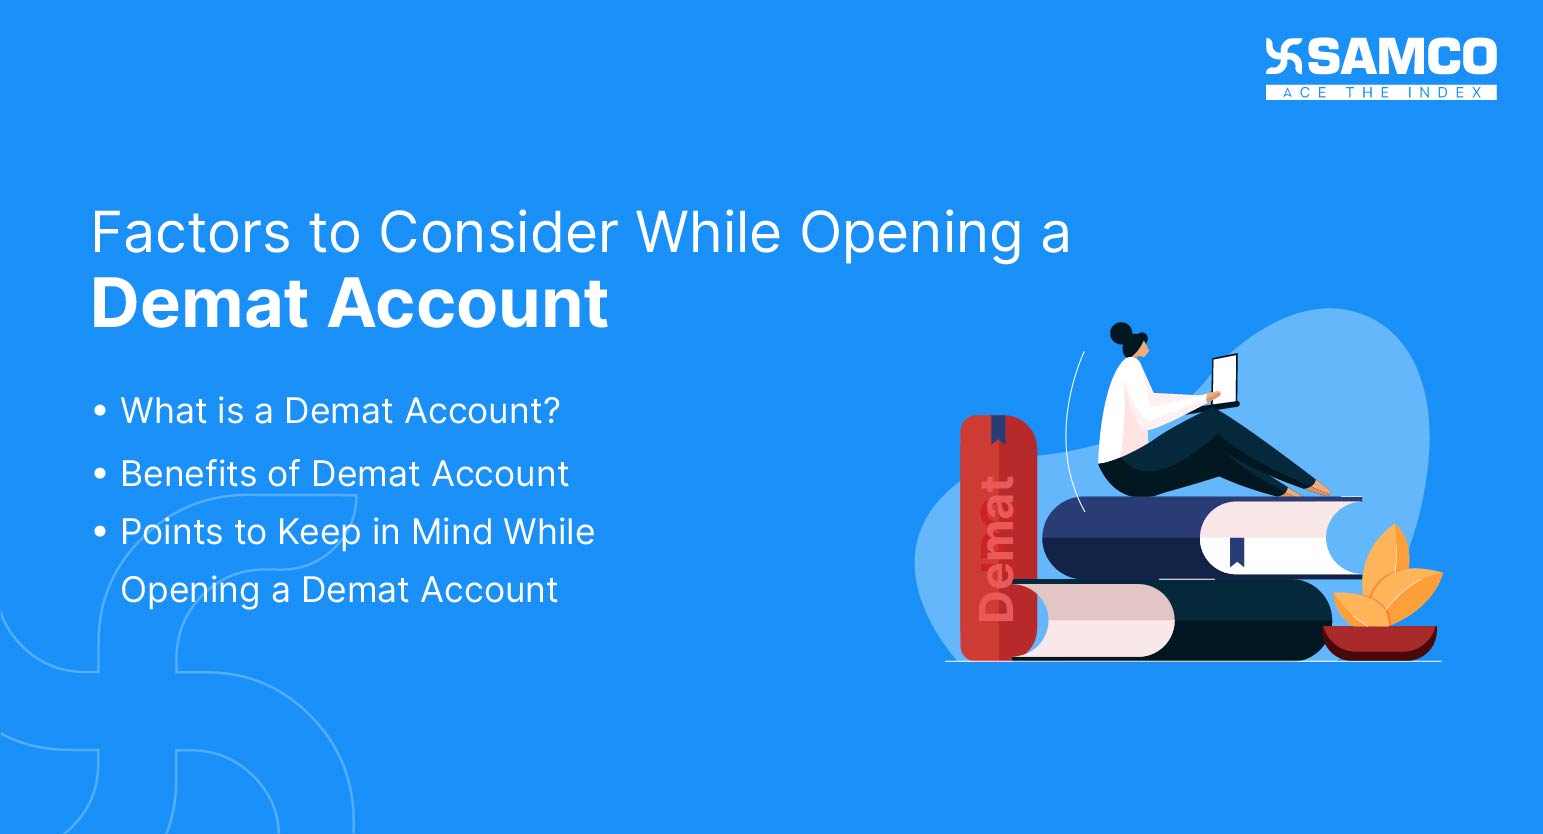 Factors to Consider While Opening a Demat Account